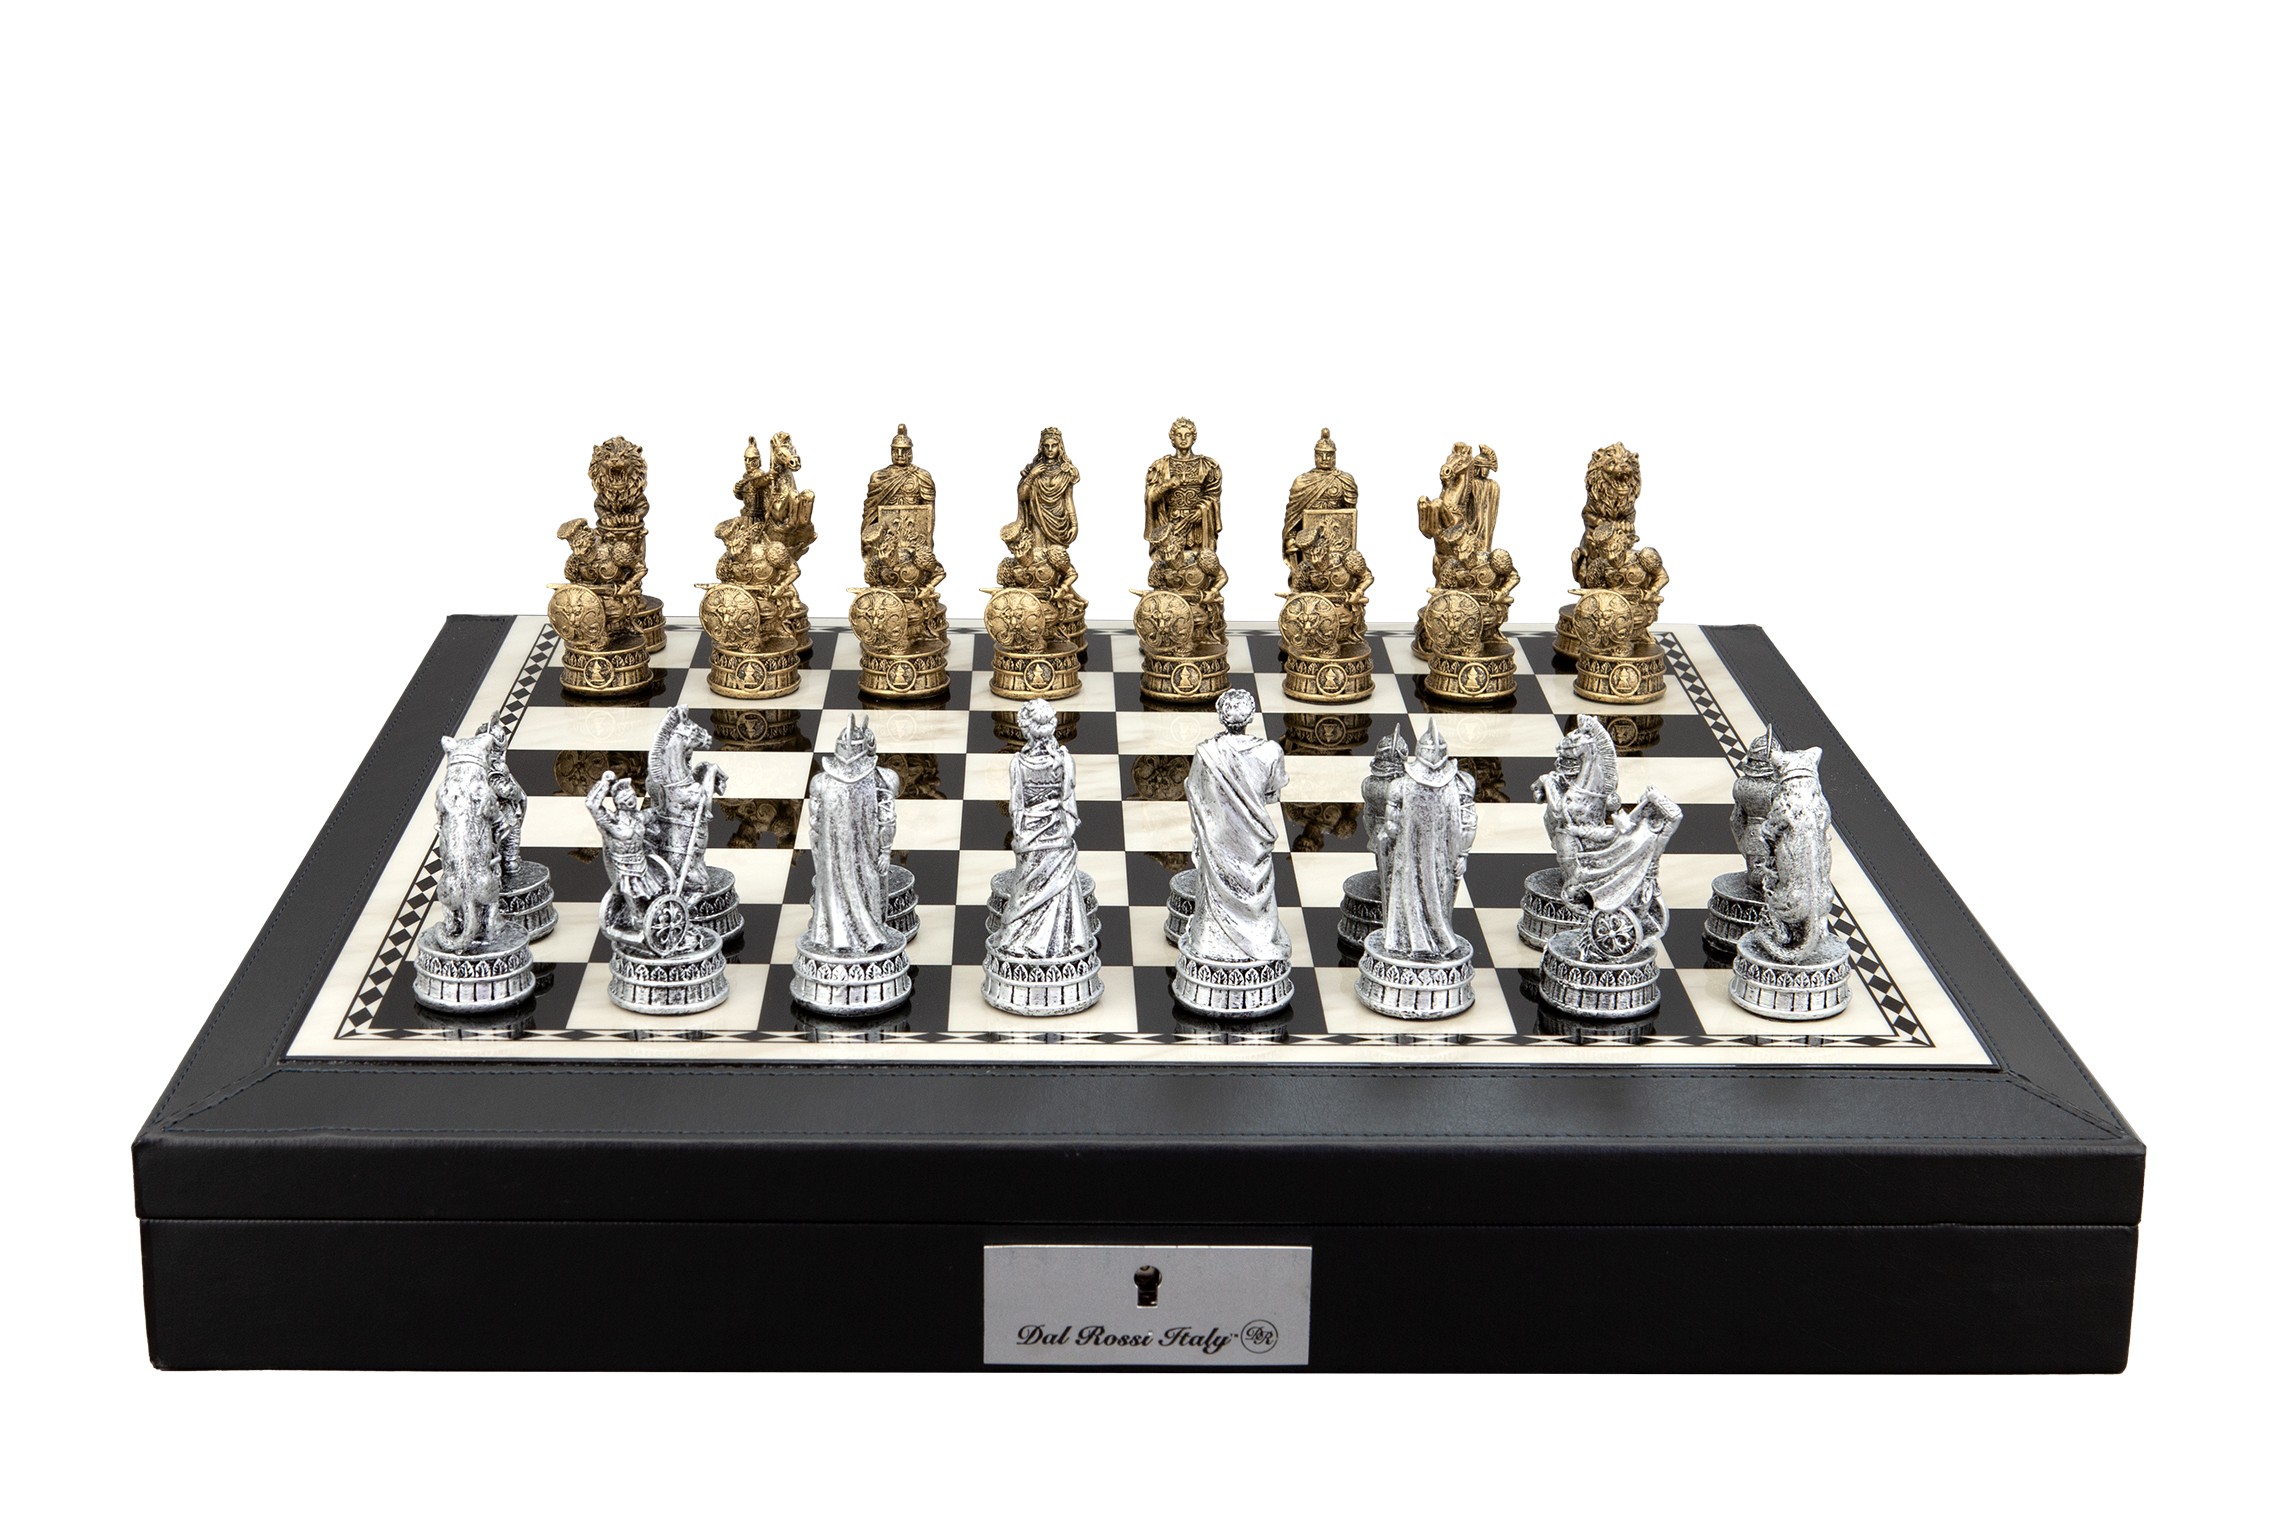 Dal Rossi Italy Roman Chessmen on a Black PU Leather Bevelled Edge chess box with compartments 18"